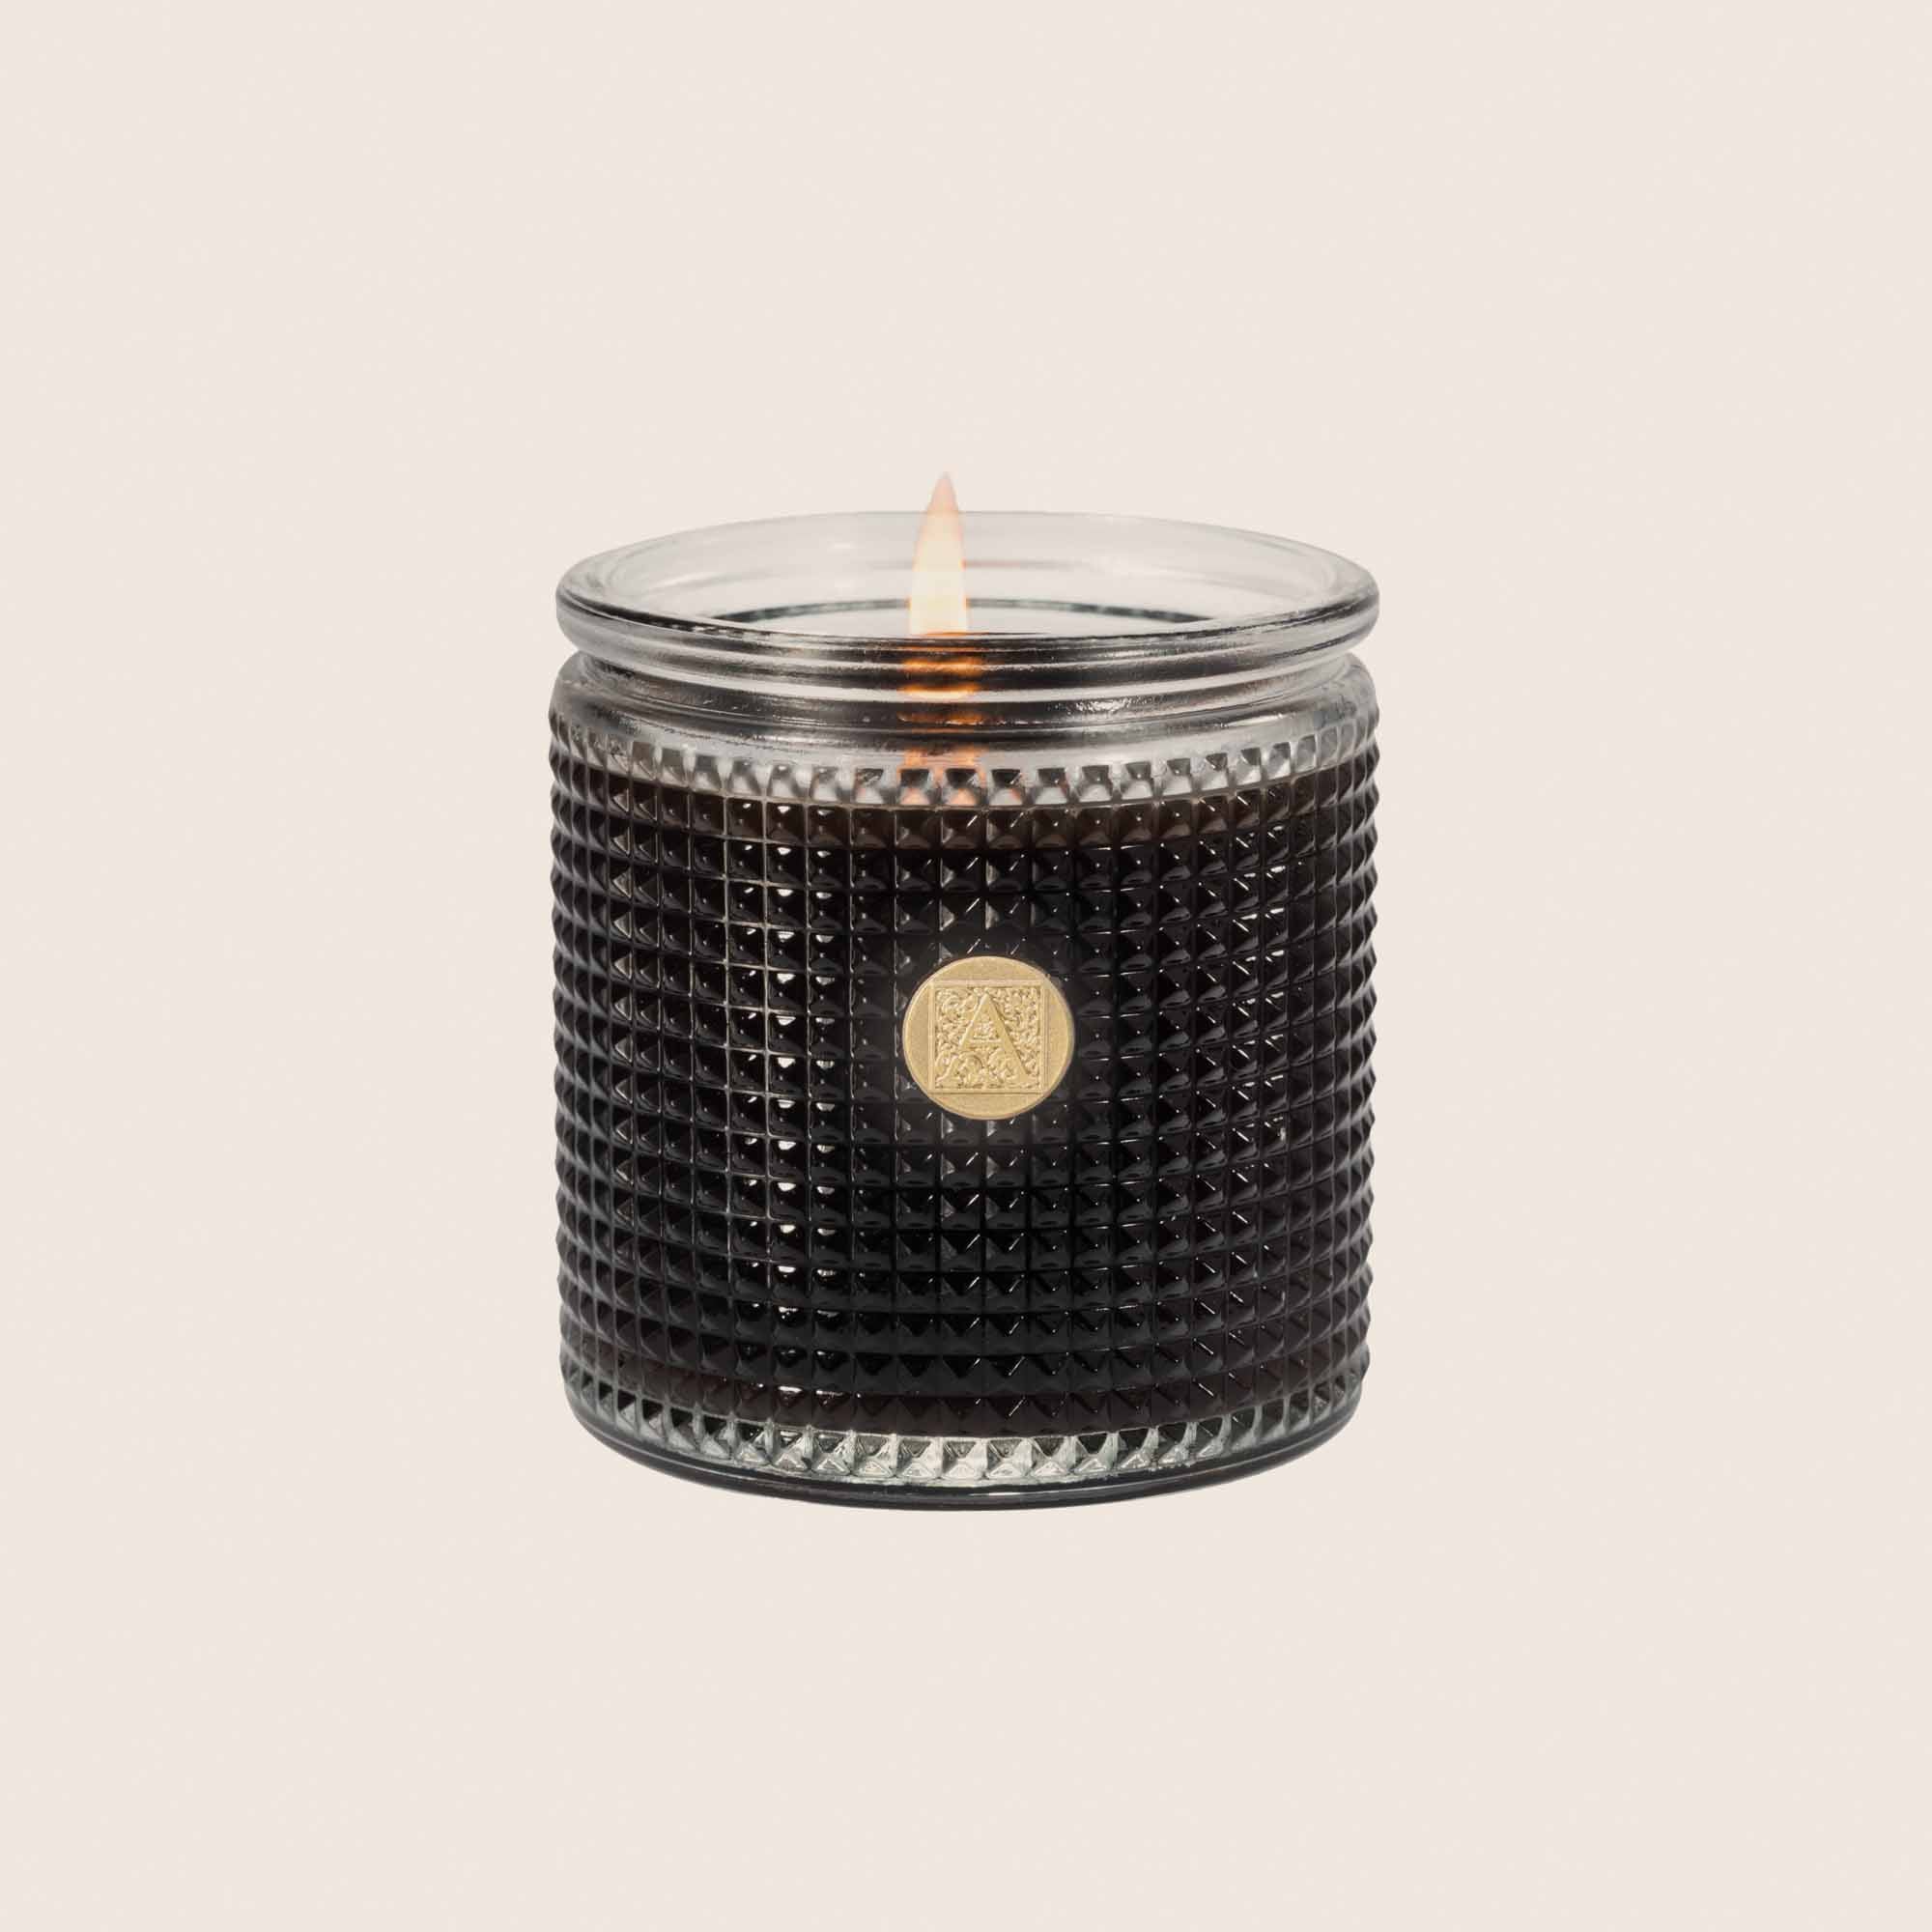 THE SMELL OF ESPRESSO TEXTURED GLASS CANDLE